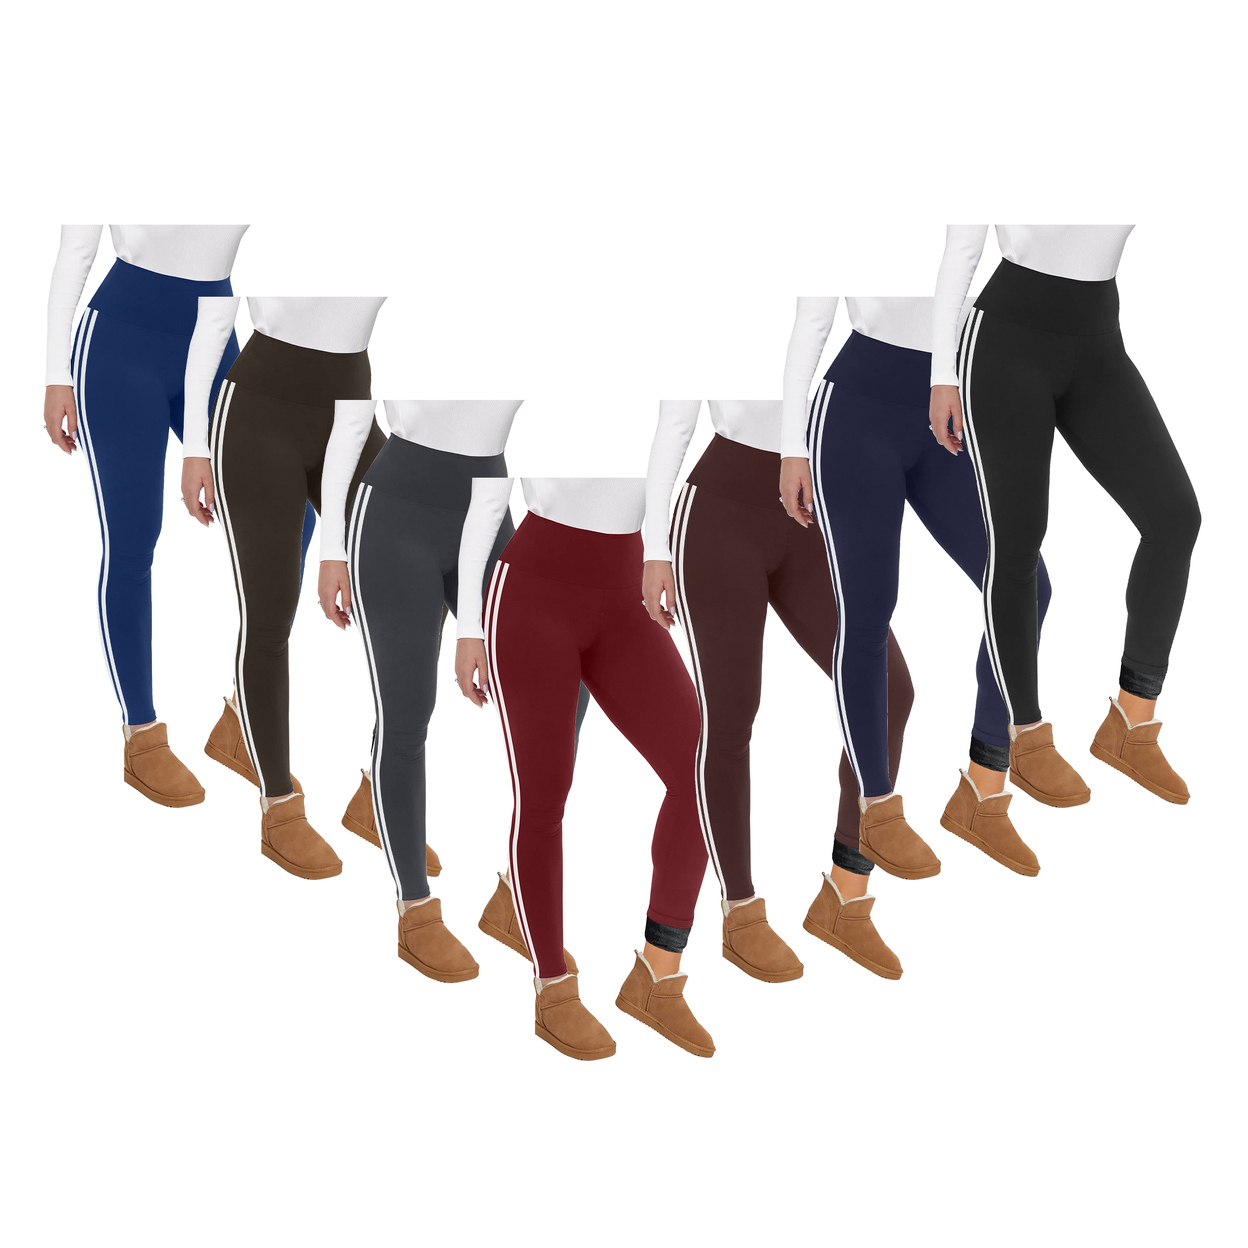 4-Pack: Women's Ultra Soft Winter Warm Cozy Striped Fur Lined Yoga Leggings - Assorted, Xx-large